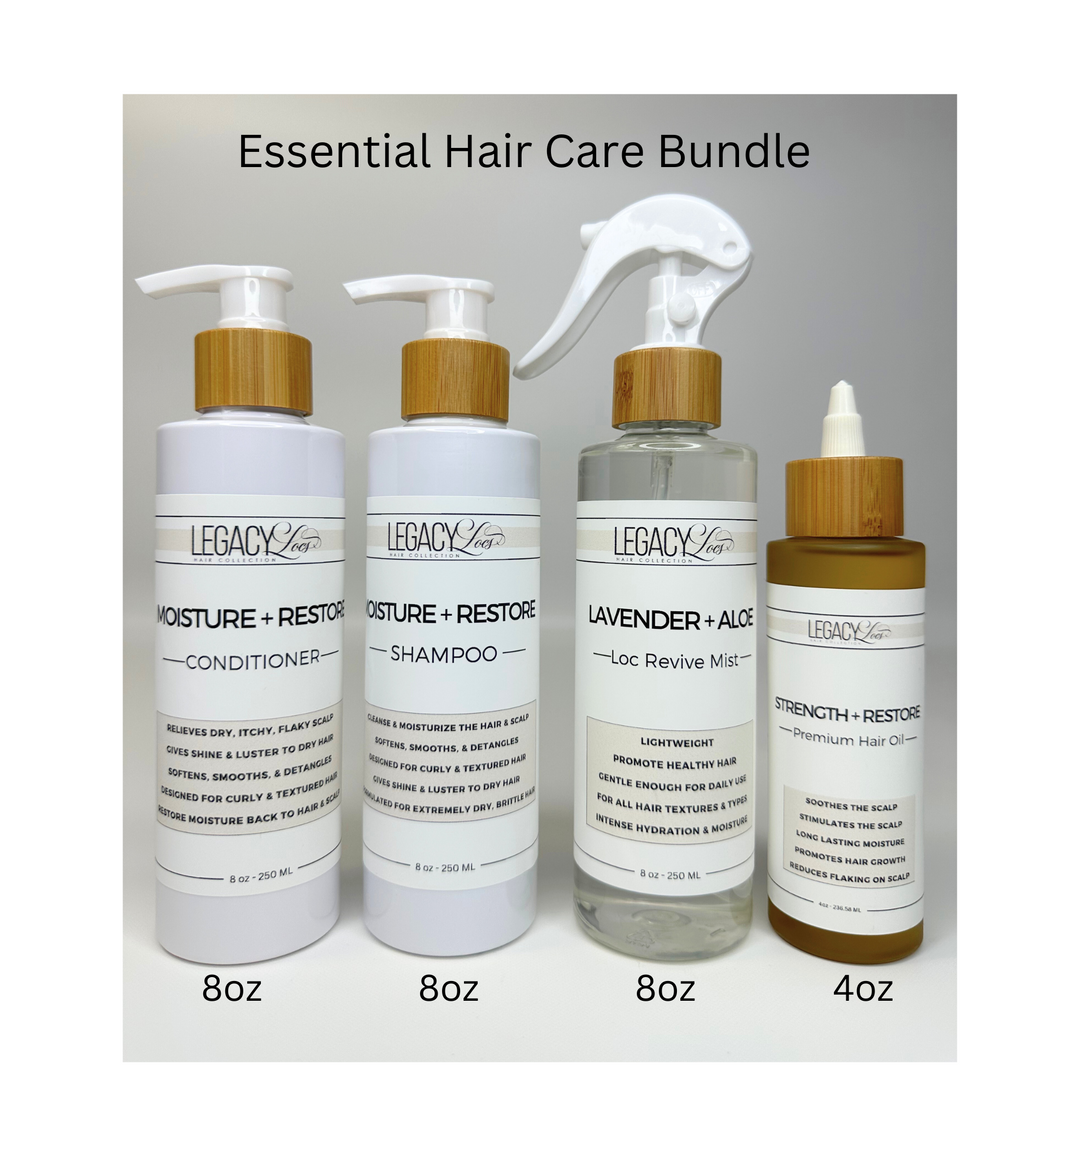 Essential Hair Care Product Bundle